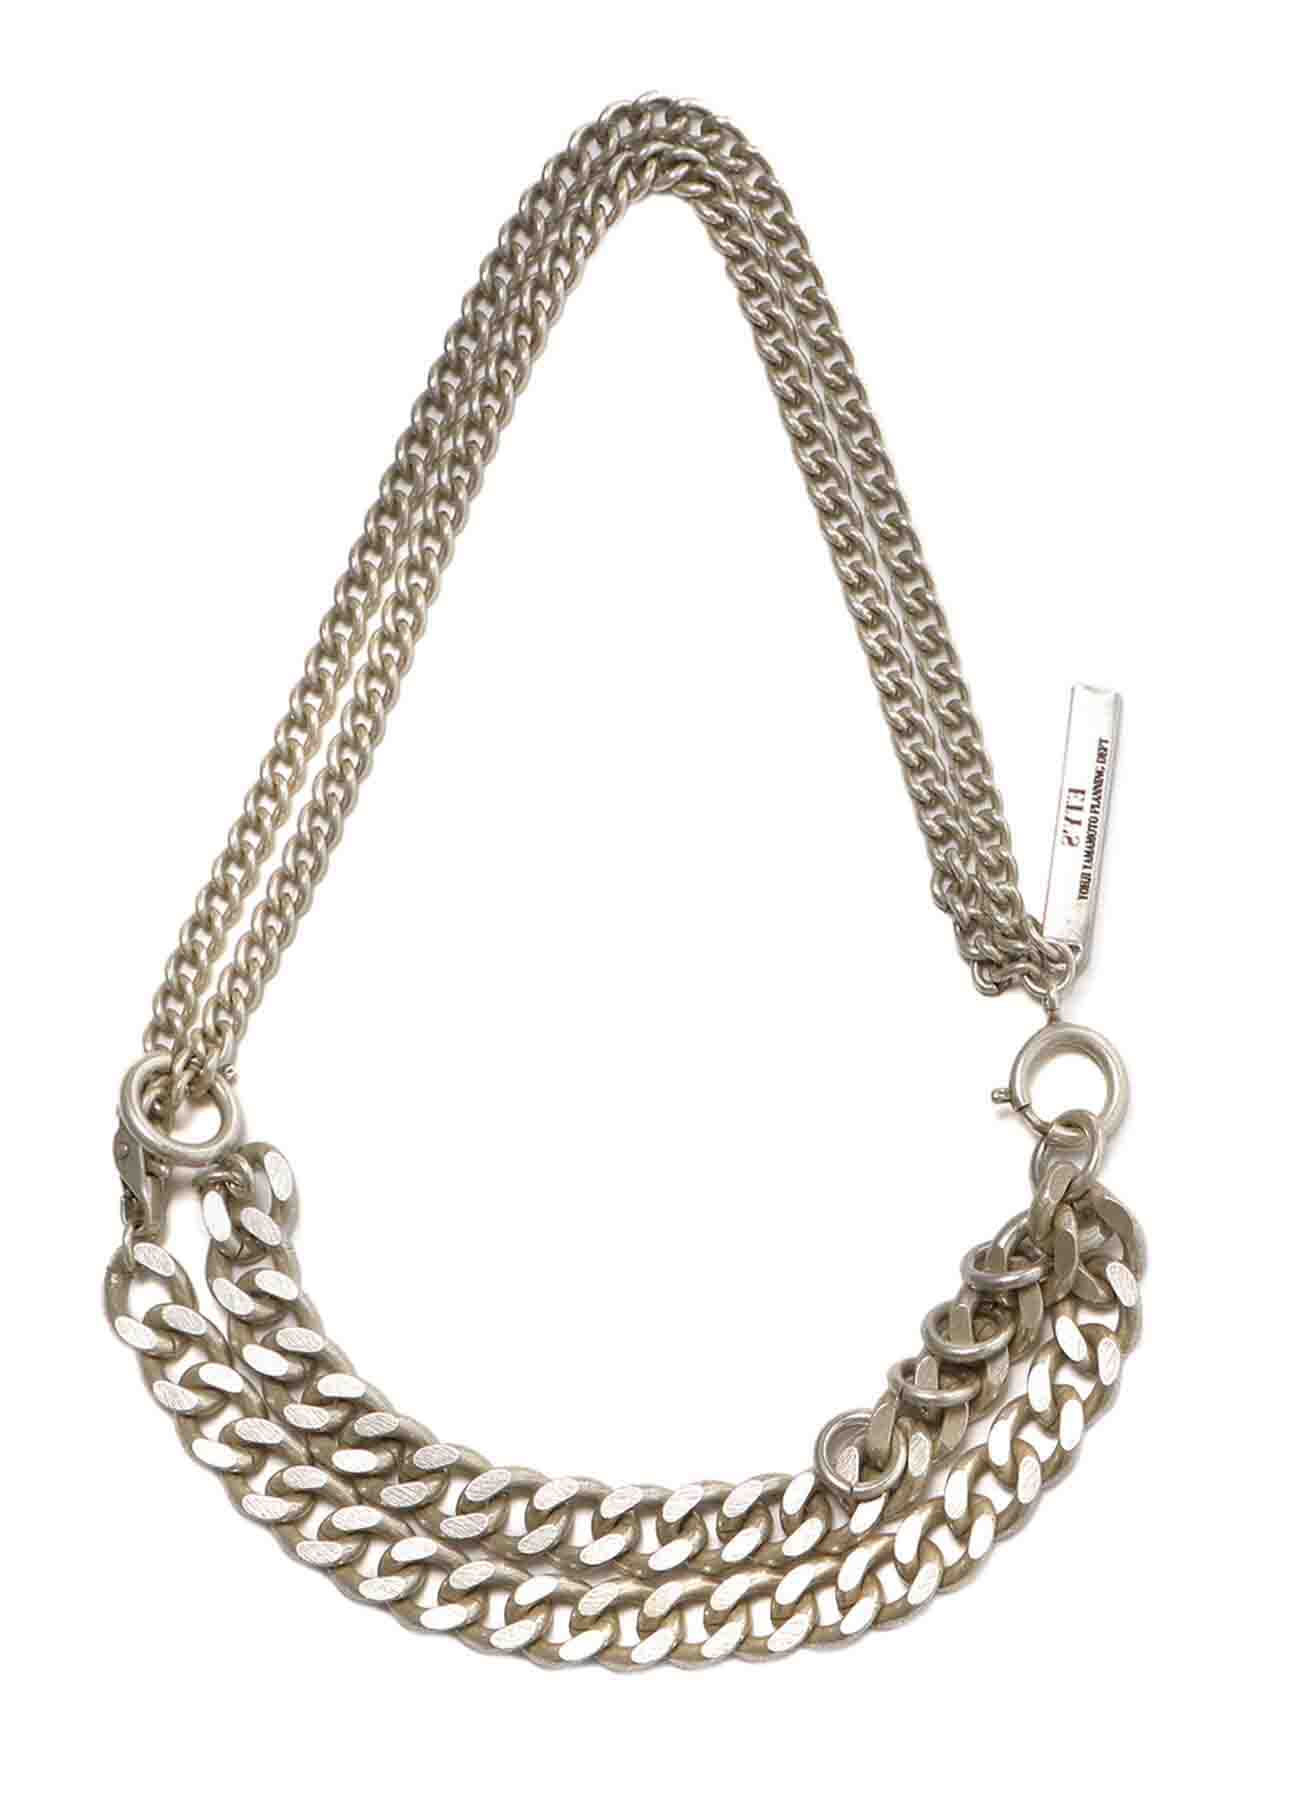 Brass 6-way Curved Chain Bracelet Necklace (FREE SIZE Antique 